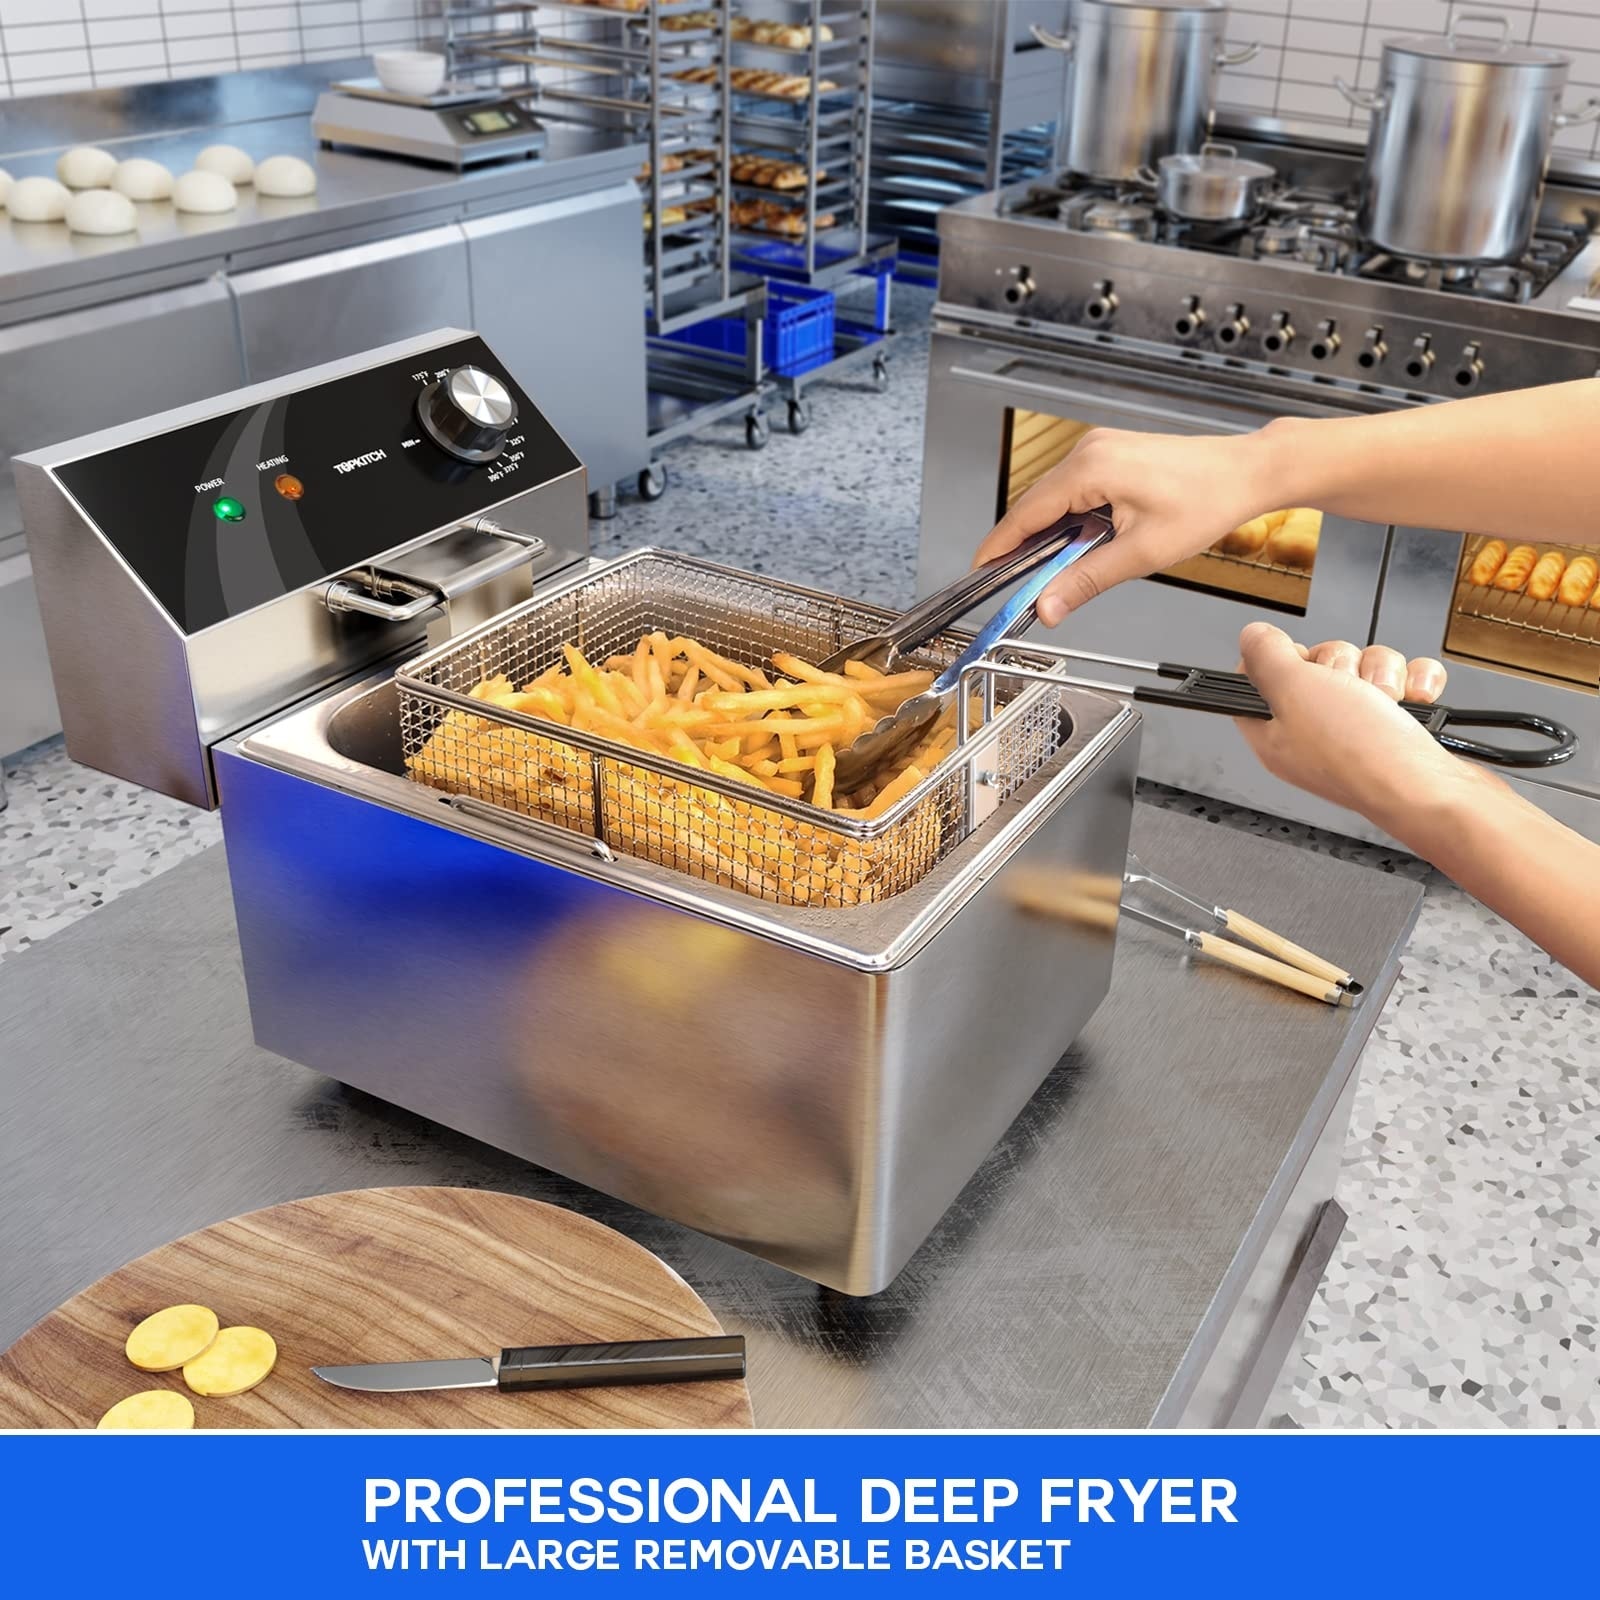 https://ak1.ostkcdn.com/images/products/is/images/direct/39c82295e3bd6f60cd43c3f2c7c0fa066bb5e0f4/Electric-Deep-Fryer-Countertop-Deep-Fryer-with-Basket-and-Lid-Capacity-10L%2810.5QT%29-Stainless-Steel-Single-Tank-Oil-Fryers.jpg